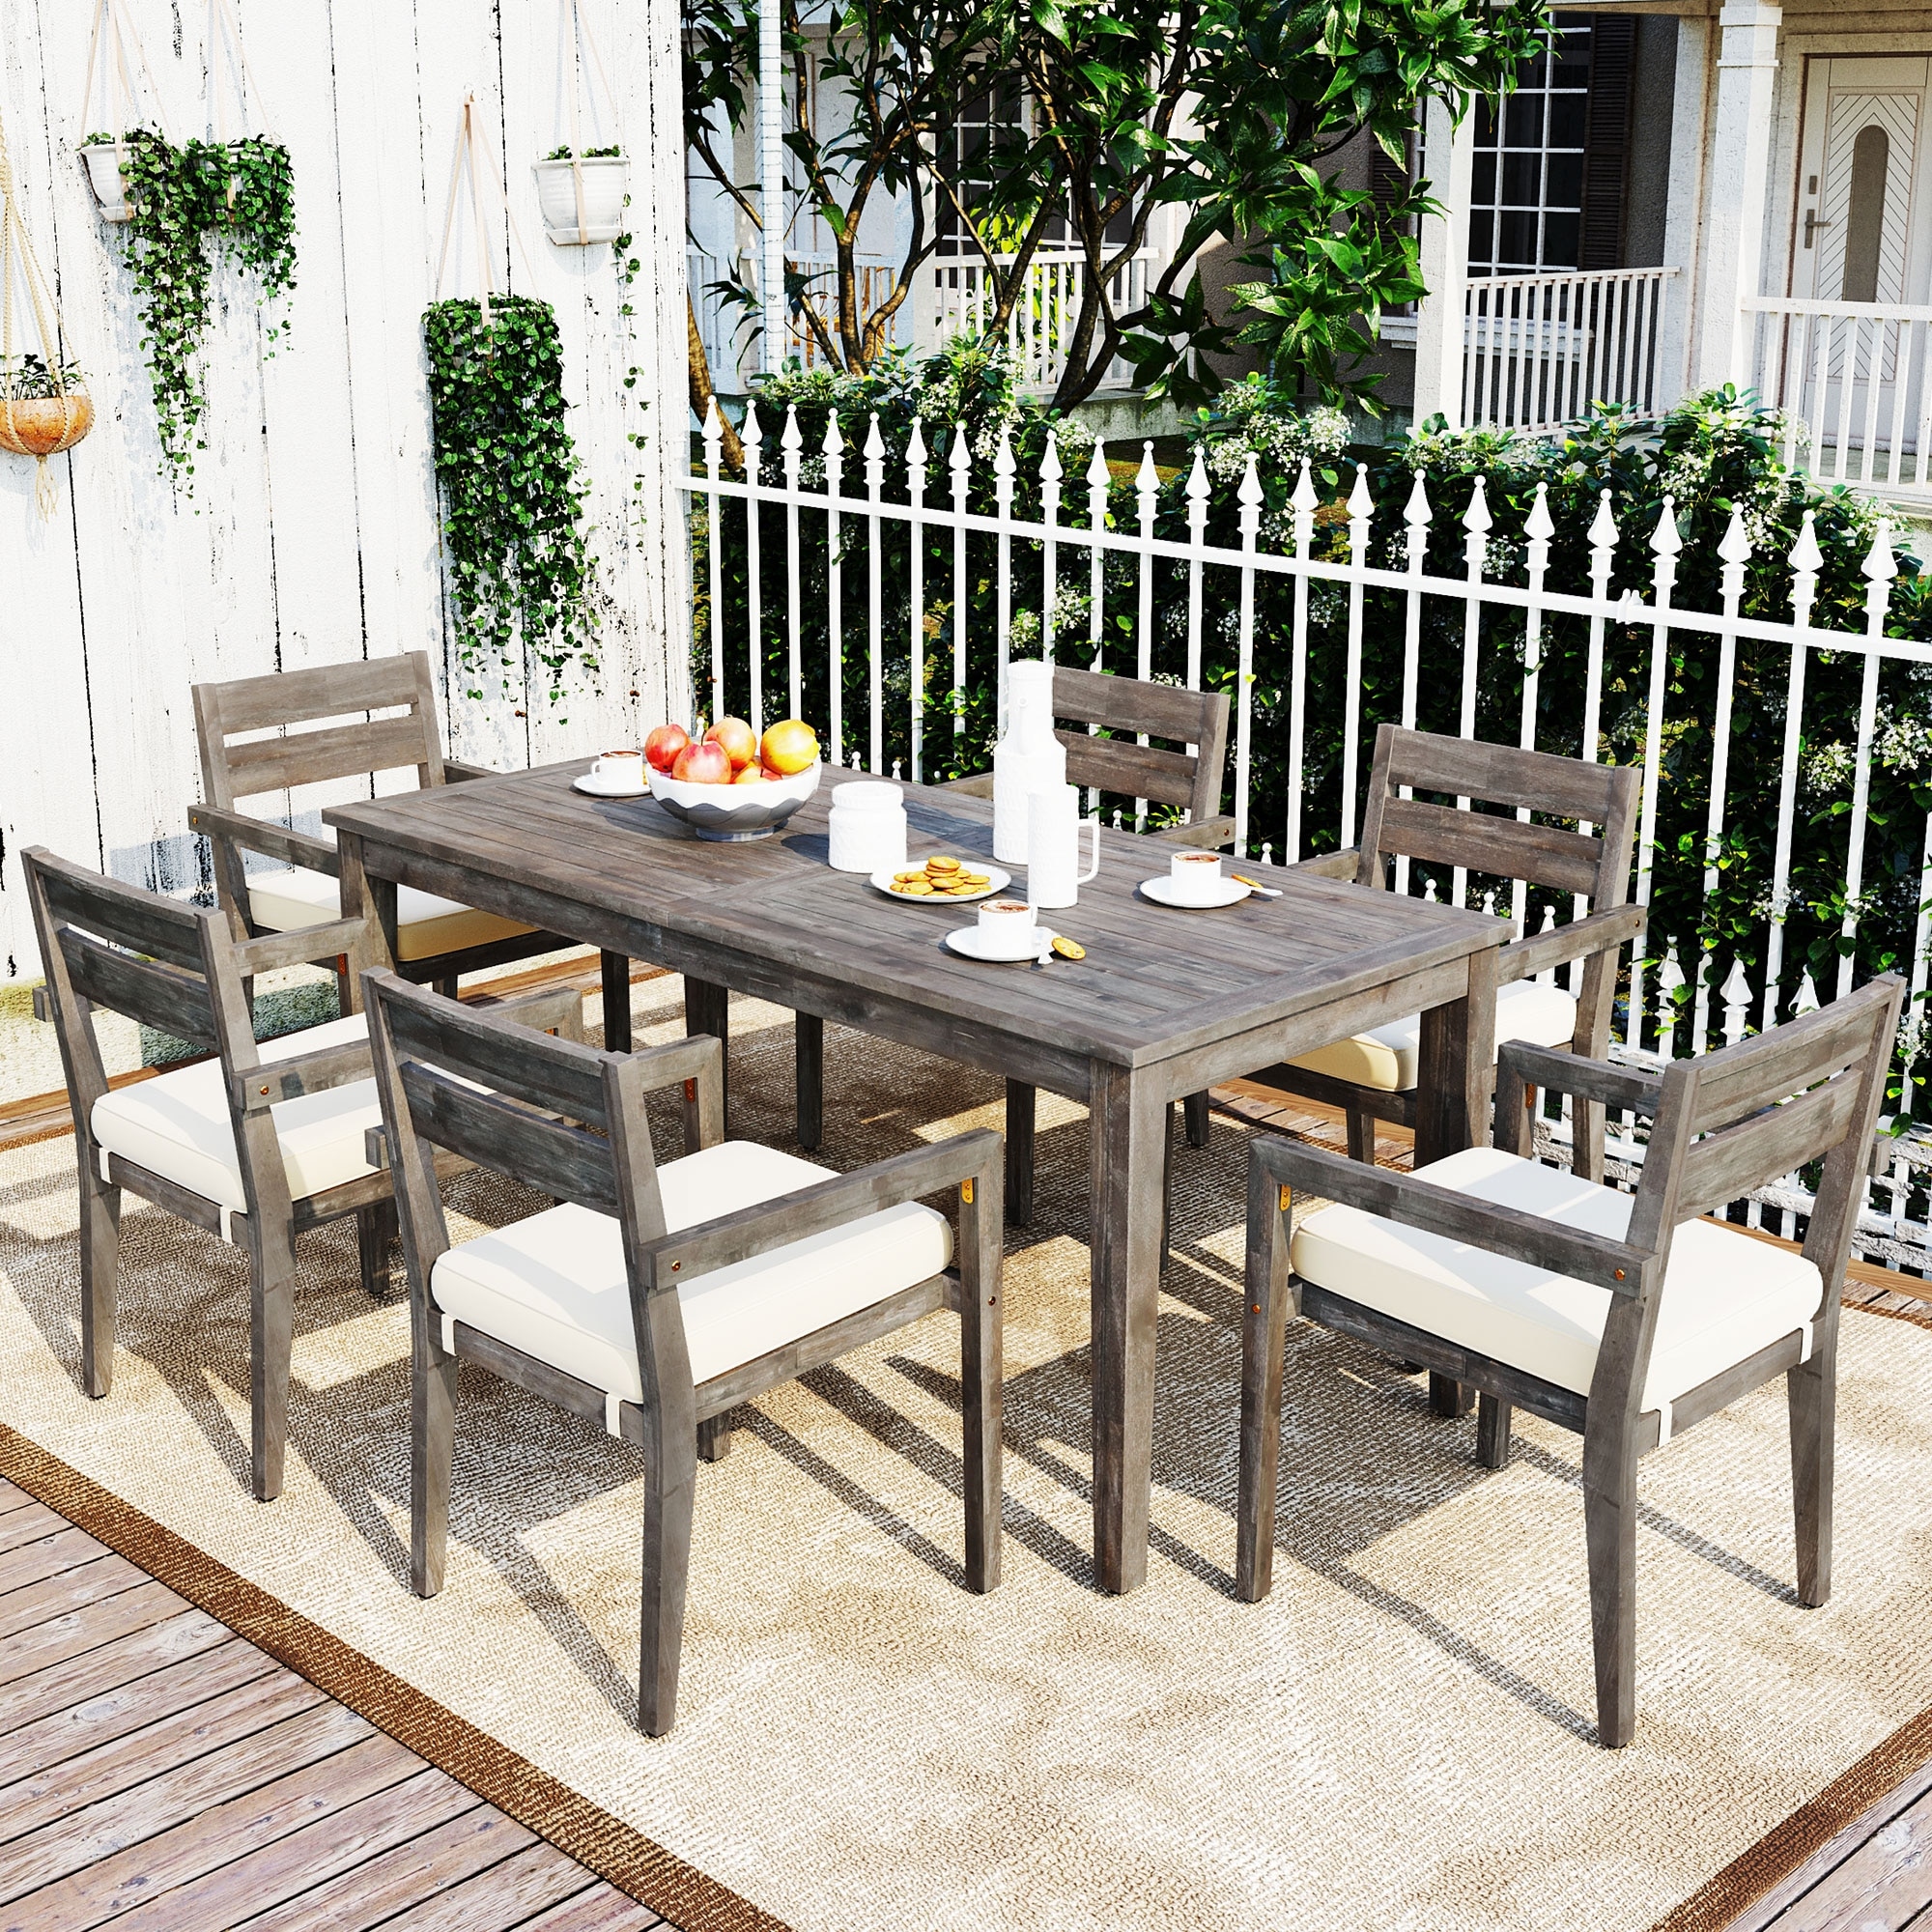 7-piece Outdoor Rectangular Wood Dining Table Set With 6 Chairs